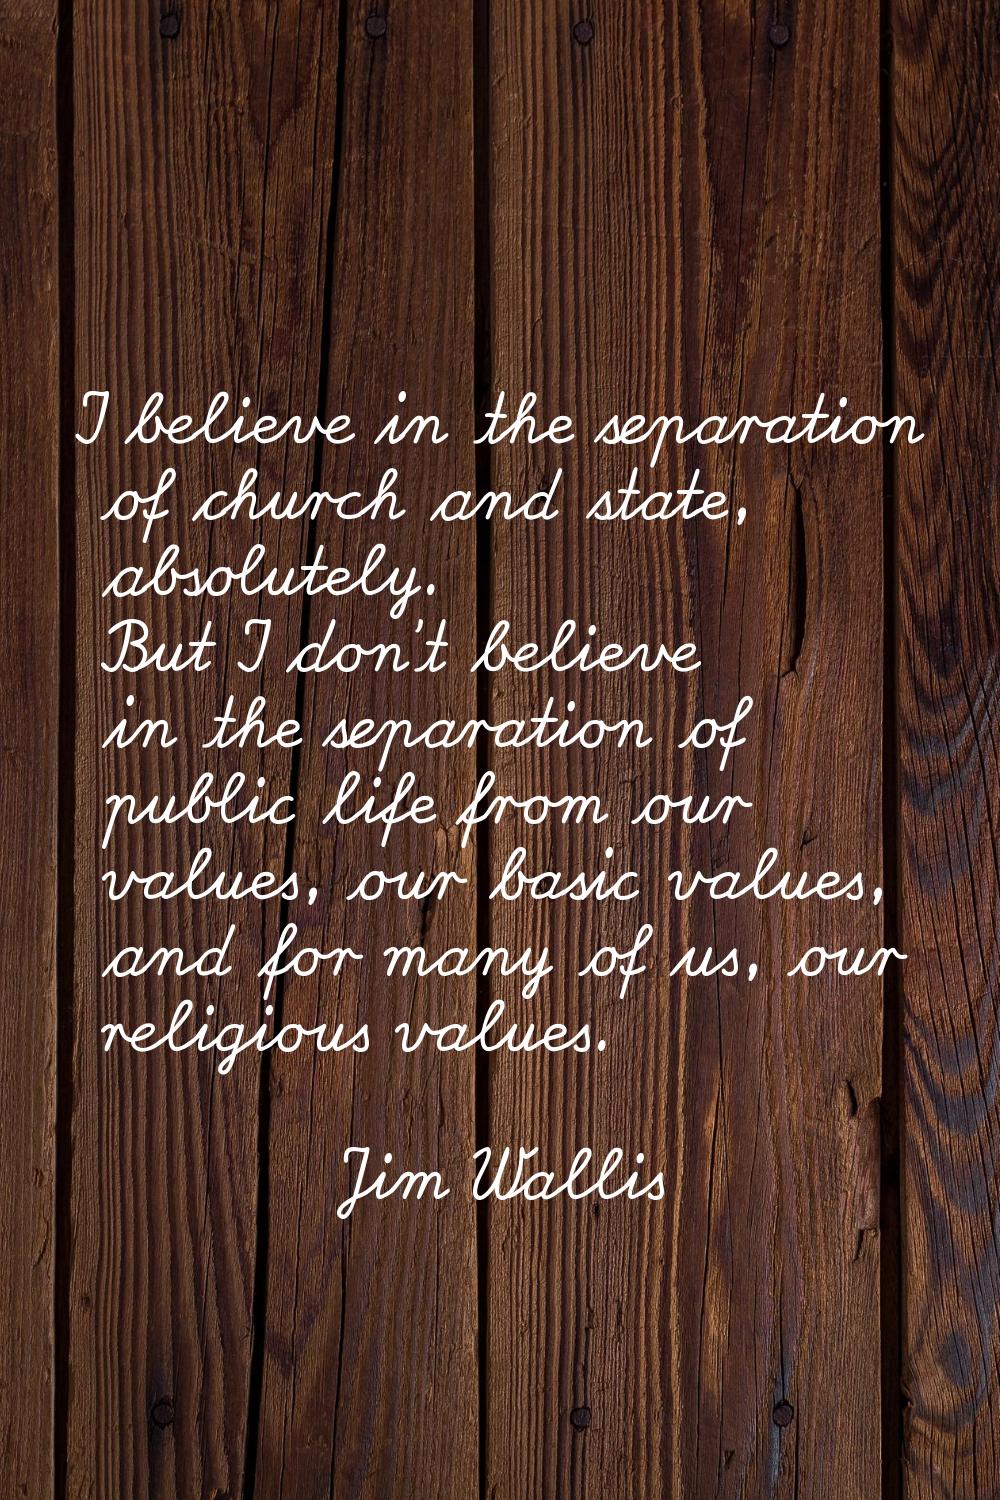 I believe in the separation of church and state, absolutely. But I don't believe in the separation 